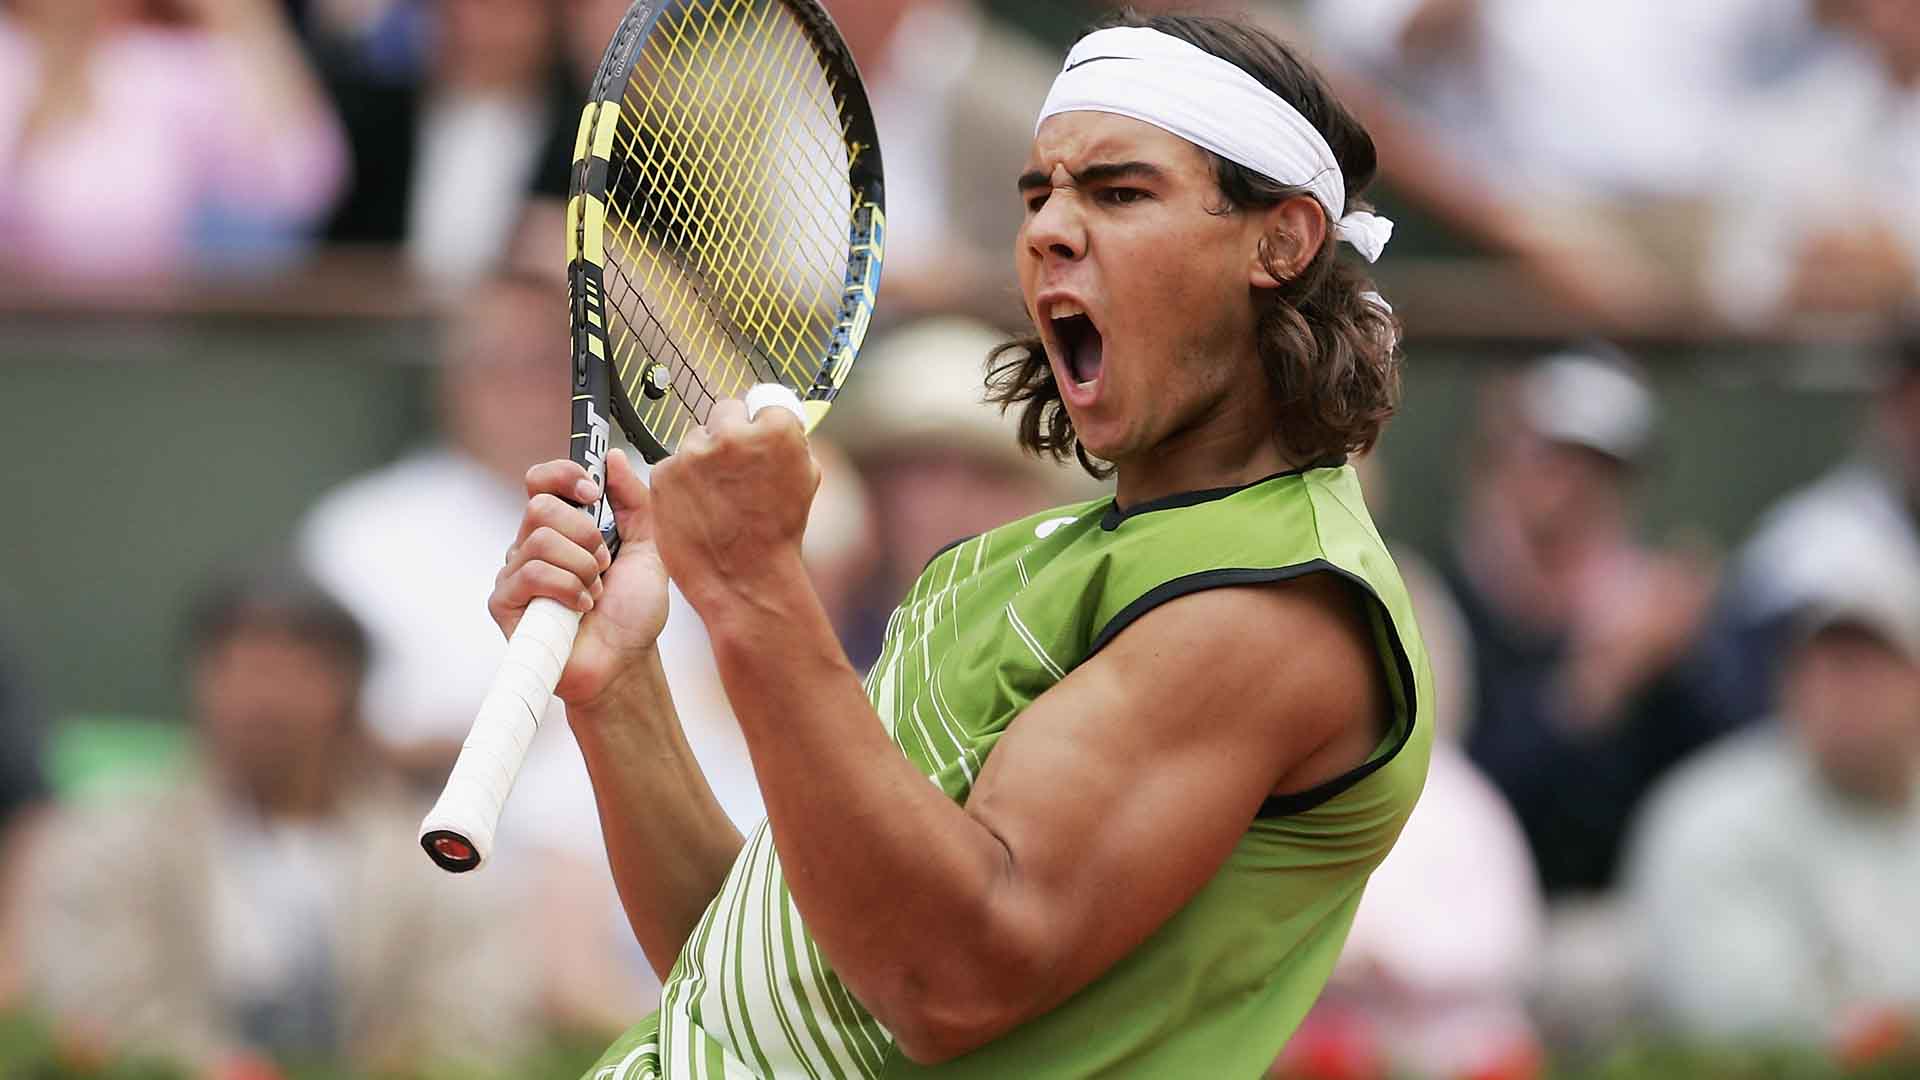 Rafael Nadal defeats Mariano Puerta of Argentina 6-7(6), 6-3, 6-1, 7-5 to win his first Grand Slam title at Roland Garros in 2005.